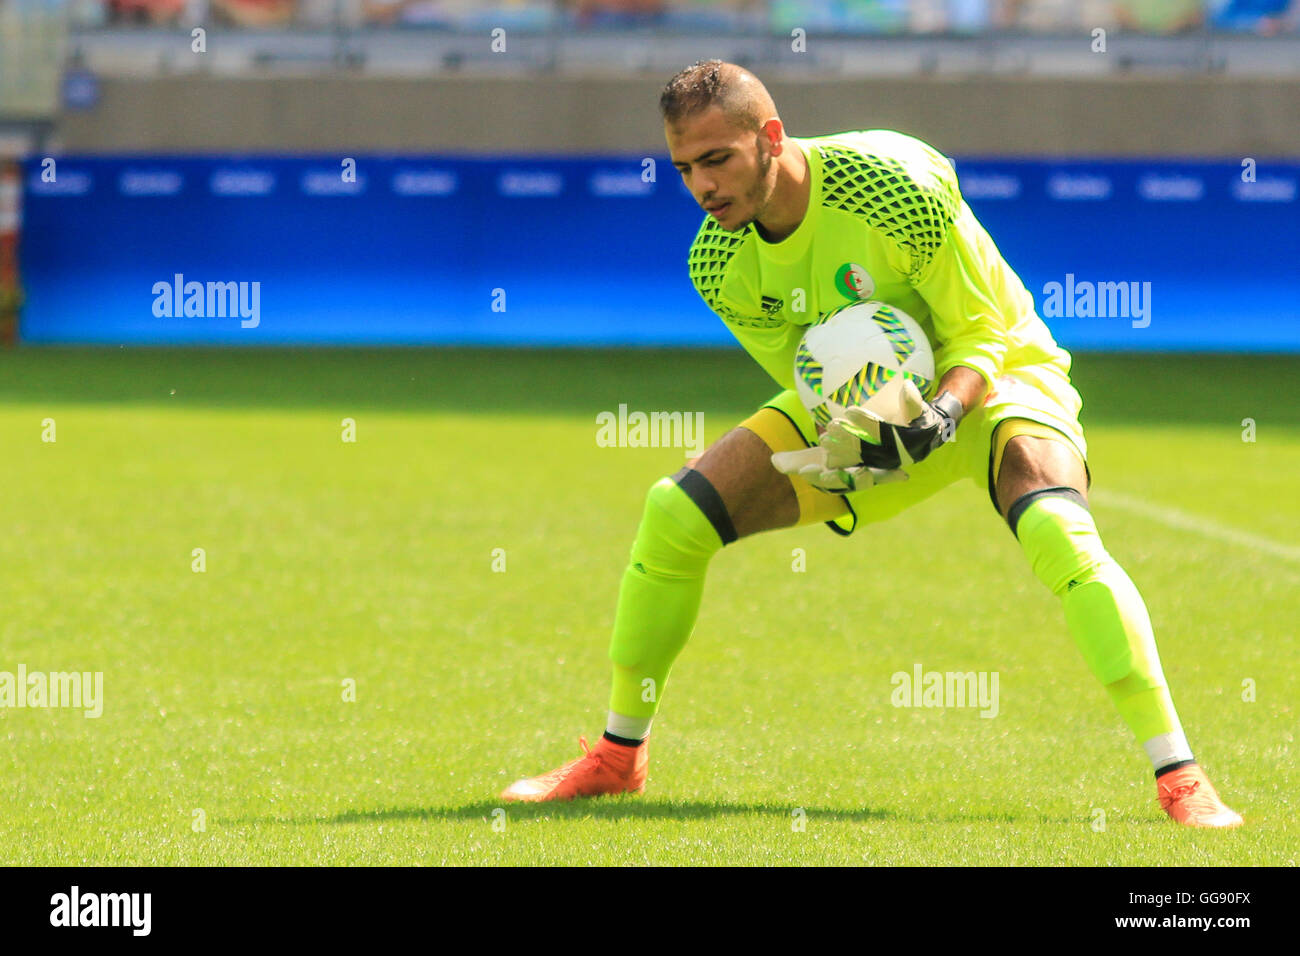 BELO HORIZONTE, MG - 10.08.2016: OLYMPICS 2016 FOOTBALL BH - Oussama METHAZEM, goalkeeper of Algeria during the match between Algeria (ALG) x Portugal (POR) by the Football Group D Olympic Men, the 2016 Olympics held in Mineirao Stadium in the host city Belo Horizonte, MG. © Foto Arena LTDA/Alamy Live News Stock Photo